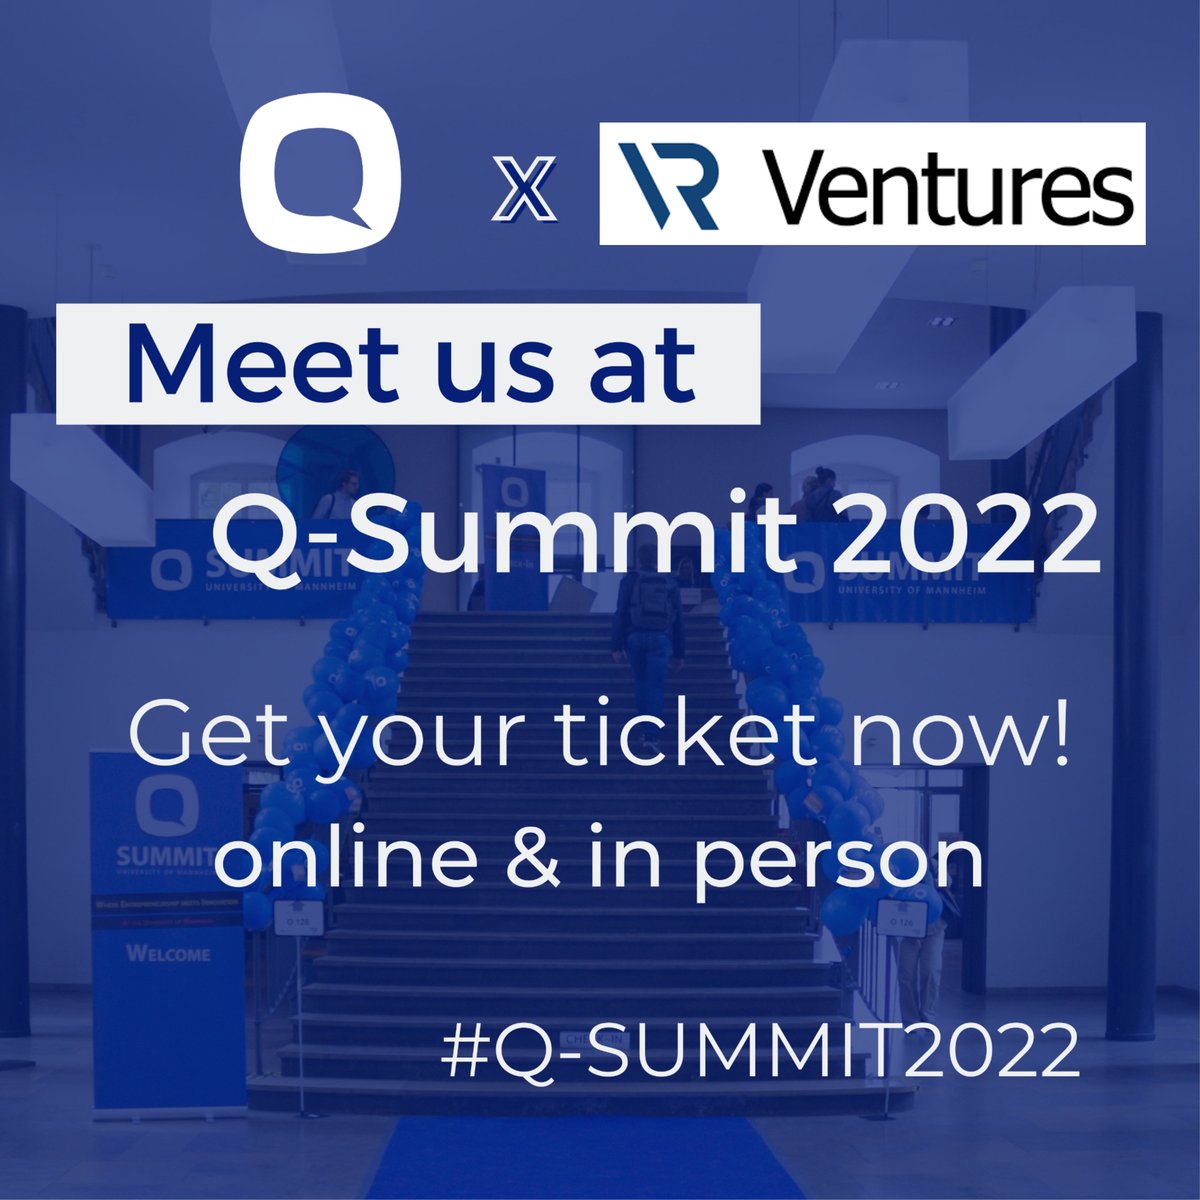 We are happy to announce that @MickaelBell90 and @RichardWurl from our Investment team will be attending this year's @Q_Summit_Ma on April 21st and 22nd in Mannheim on behalf of VR Ventures! If you want to meet them, contact Mickael and Richard in advance. See you there!